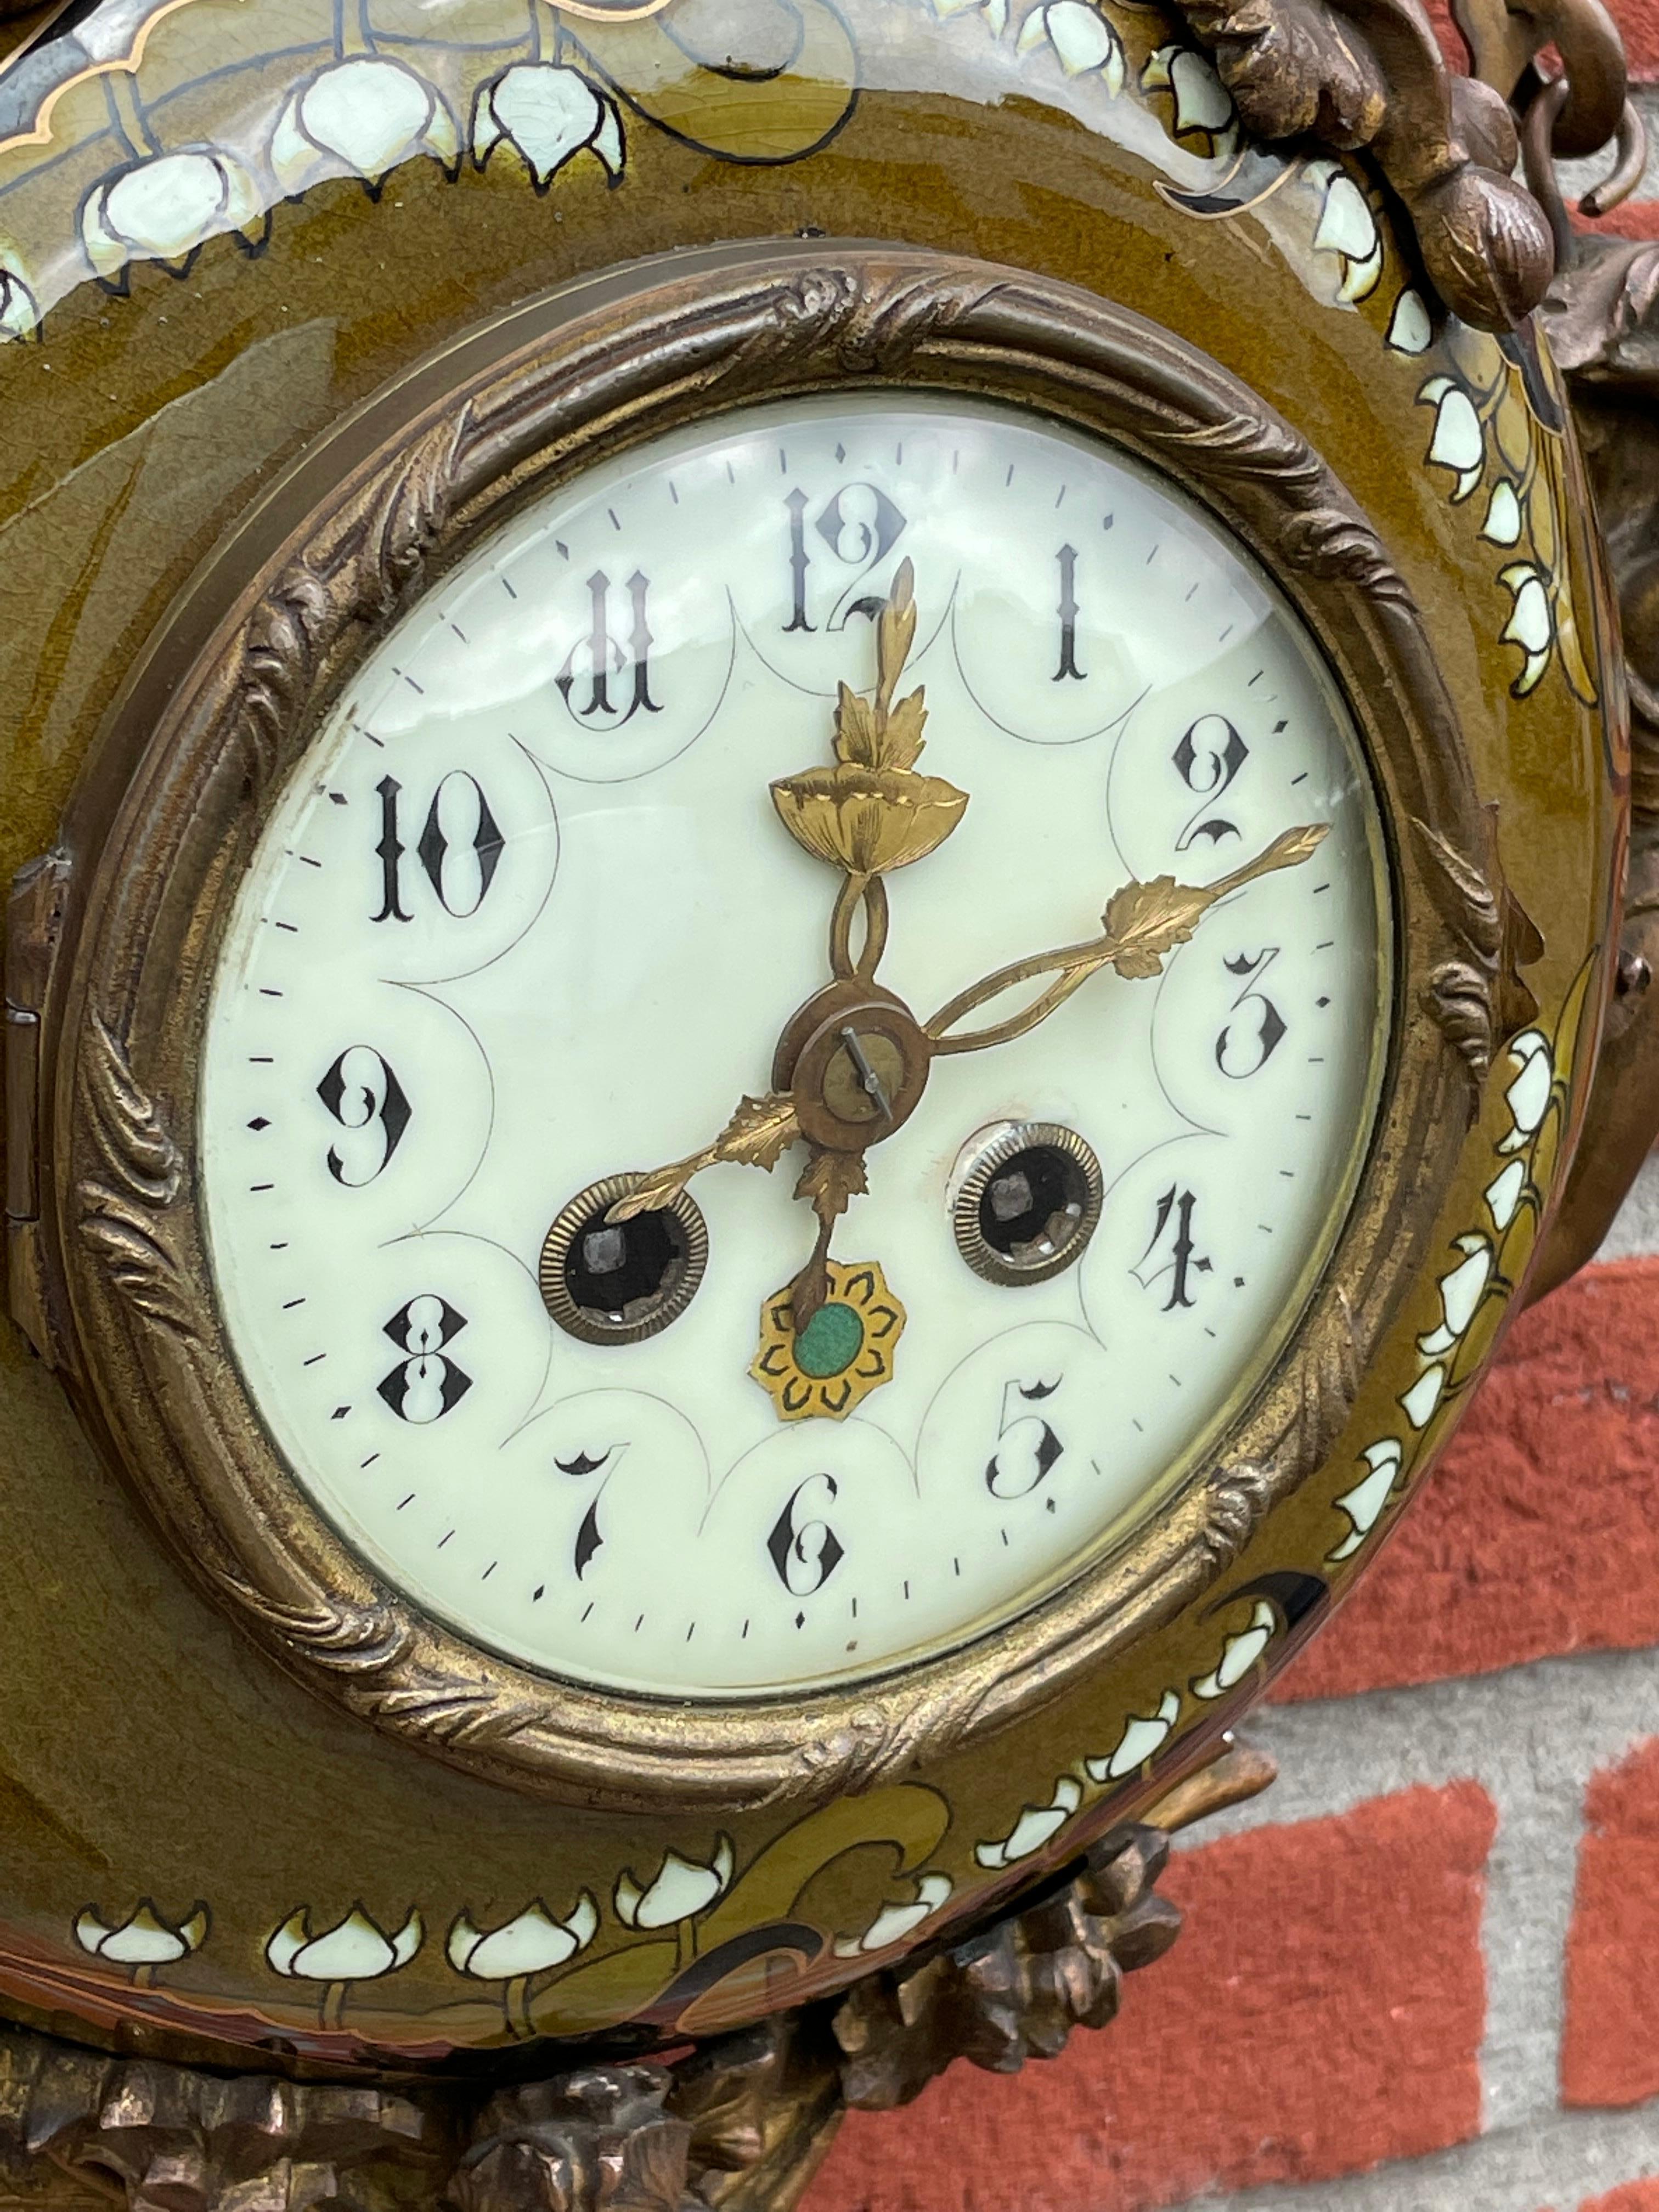 Antique & Hand Painted Arts & Crafts Majolica Wall Clock with Enameled Dial Face 2